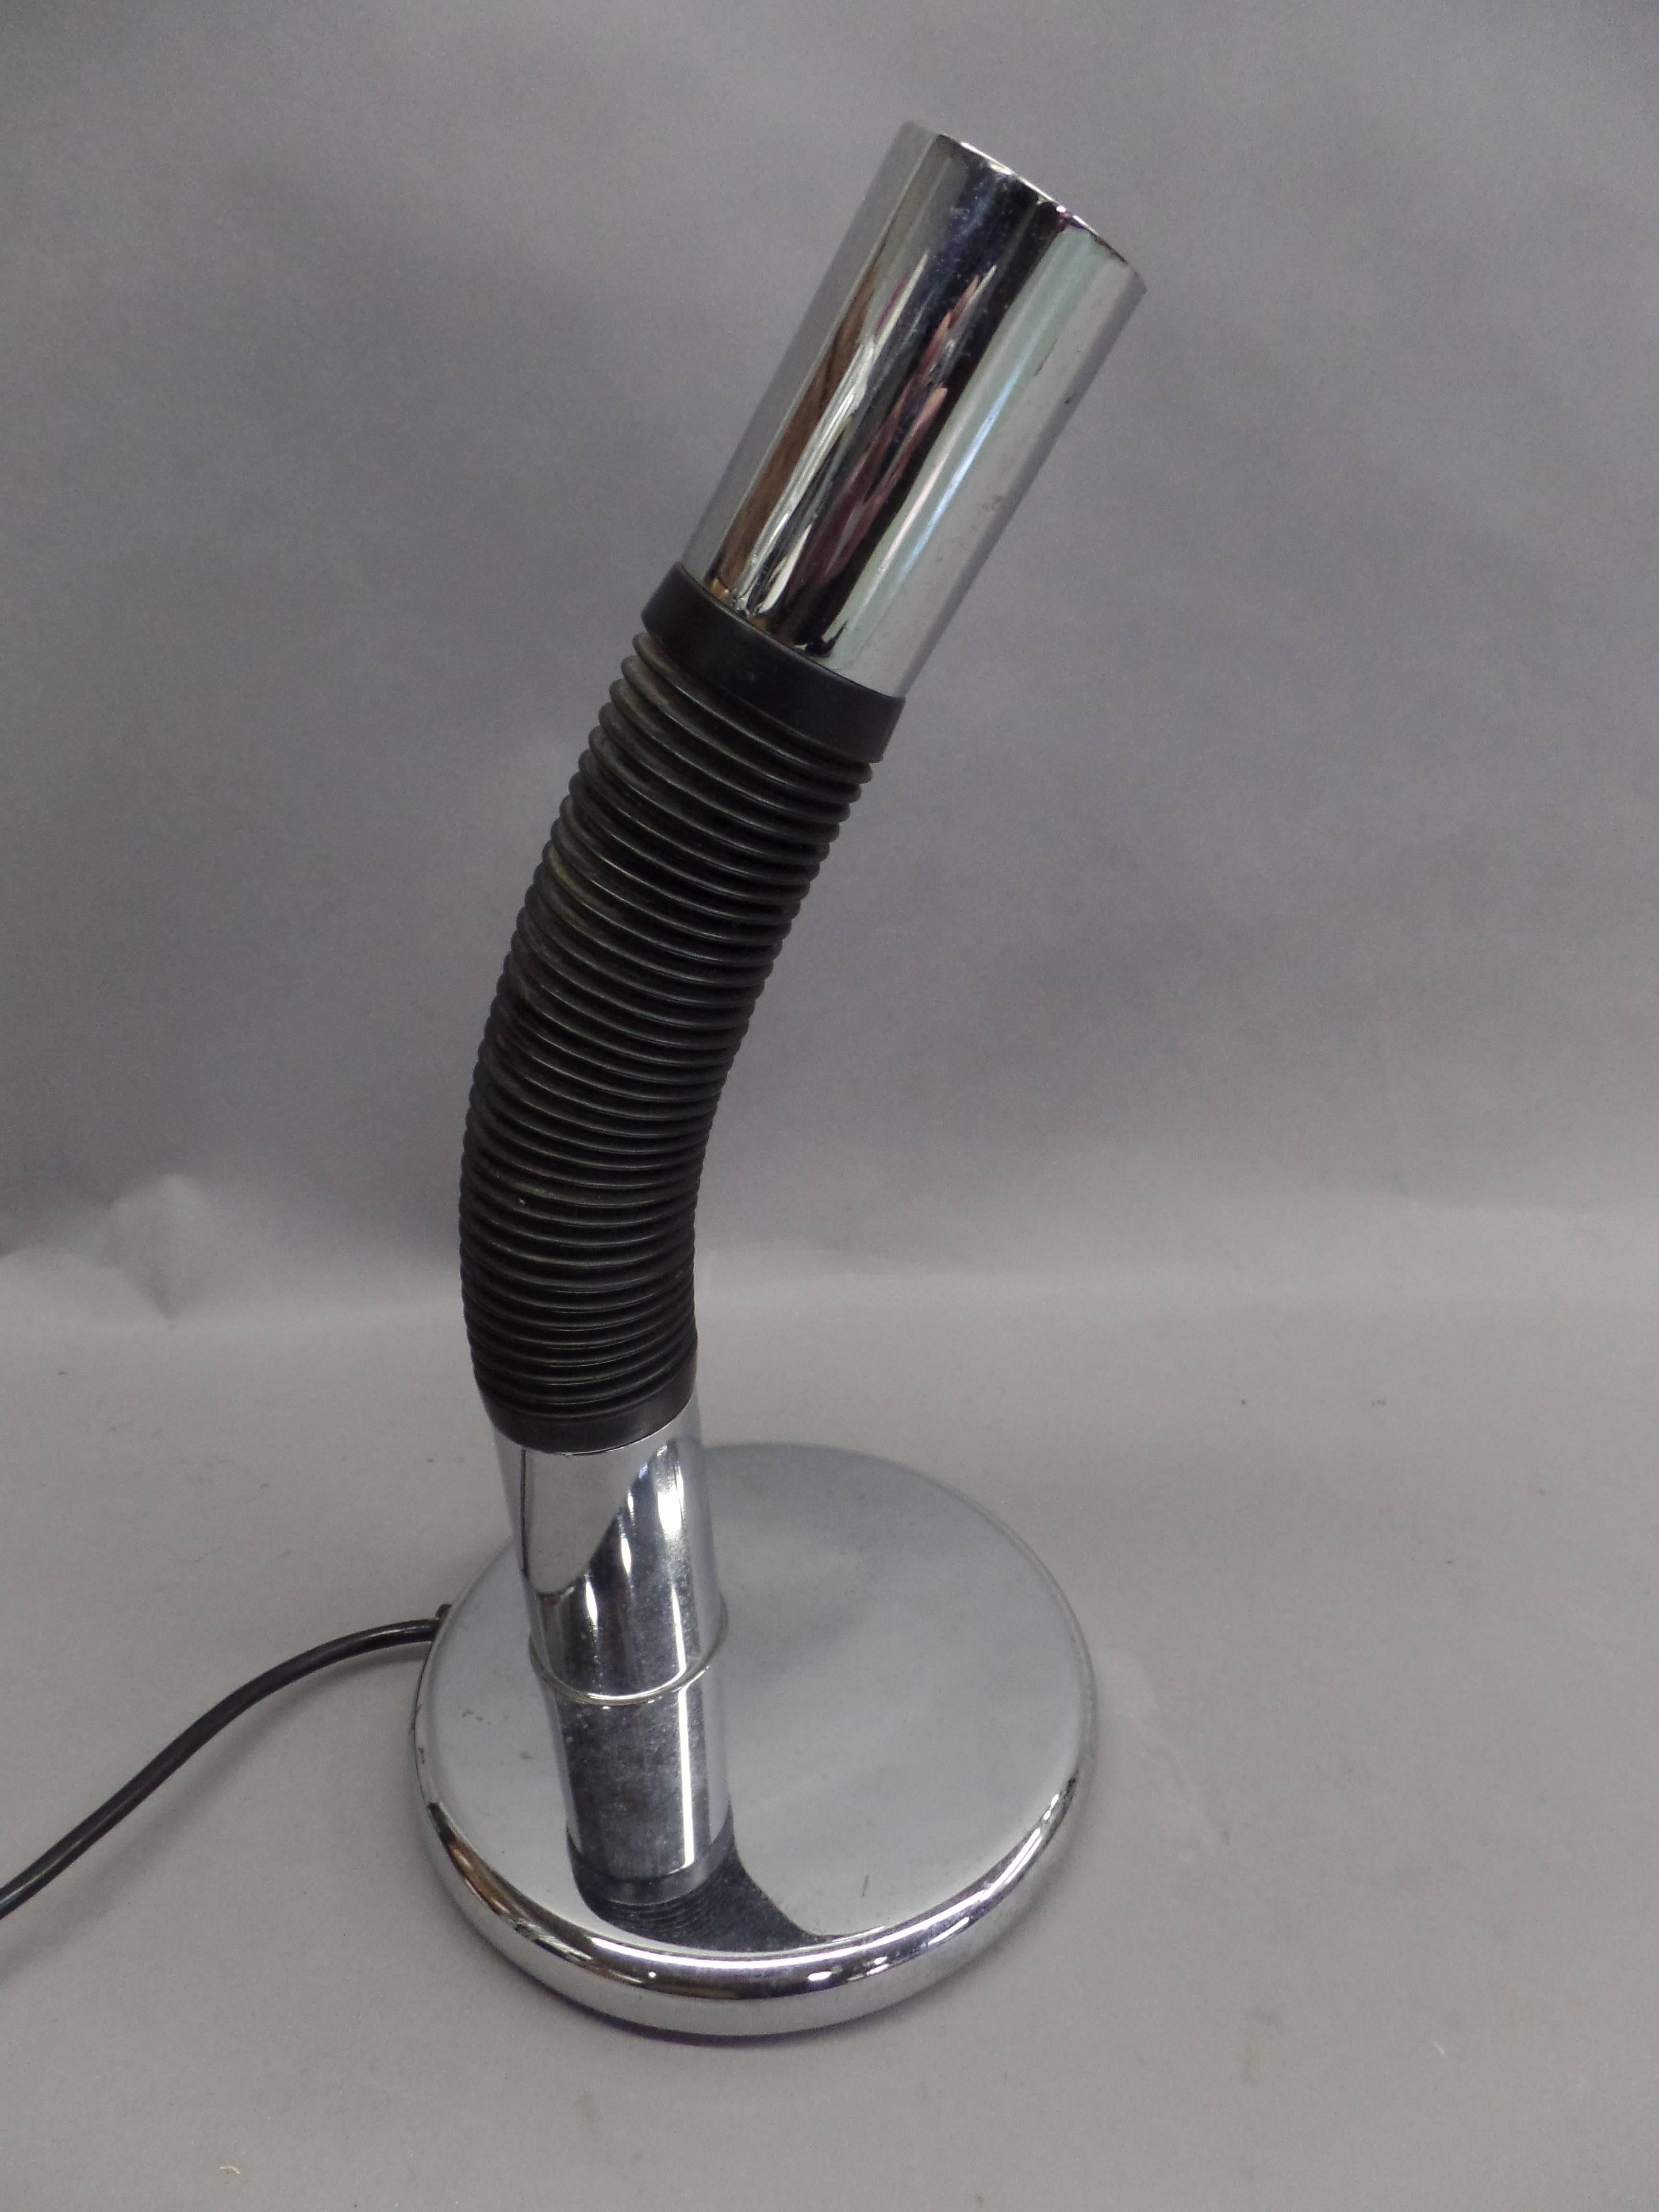 Rare Italian Mid-Century Modern (Space Age) table lamp in chromed metal and flex-rubber-plastic that adjusts to send light down, sideways or up. 

Labelled: Targetti Sankey on frame.